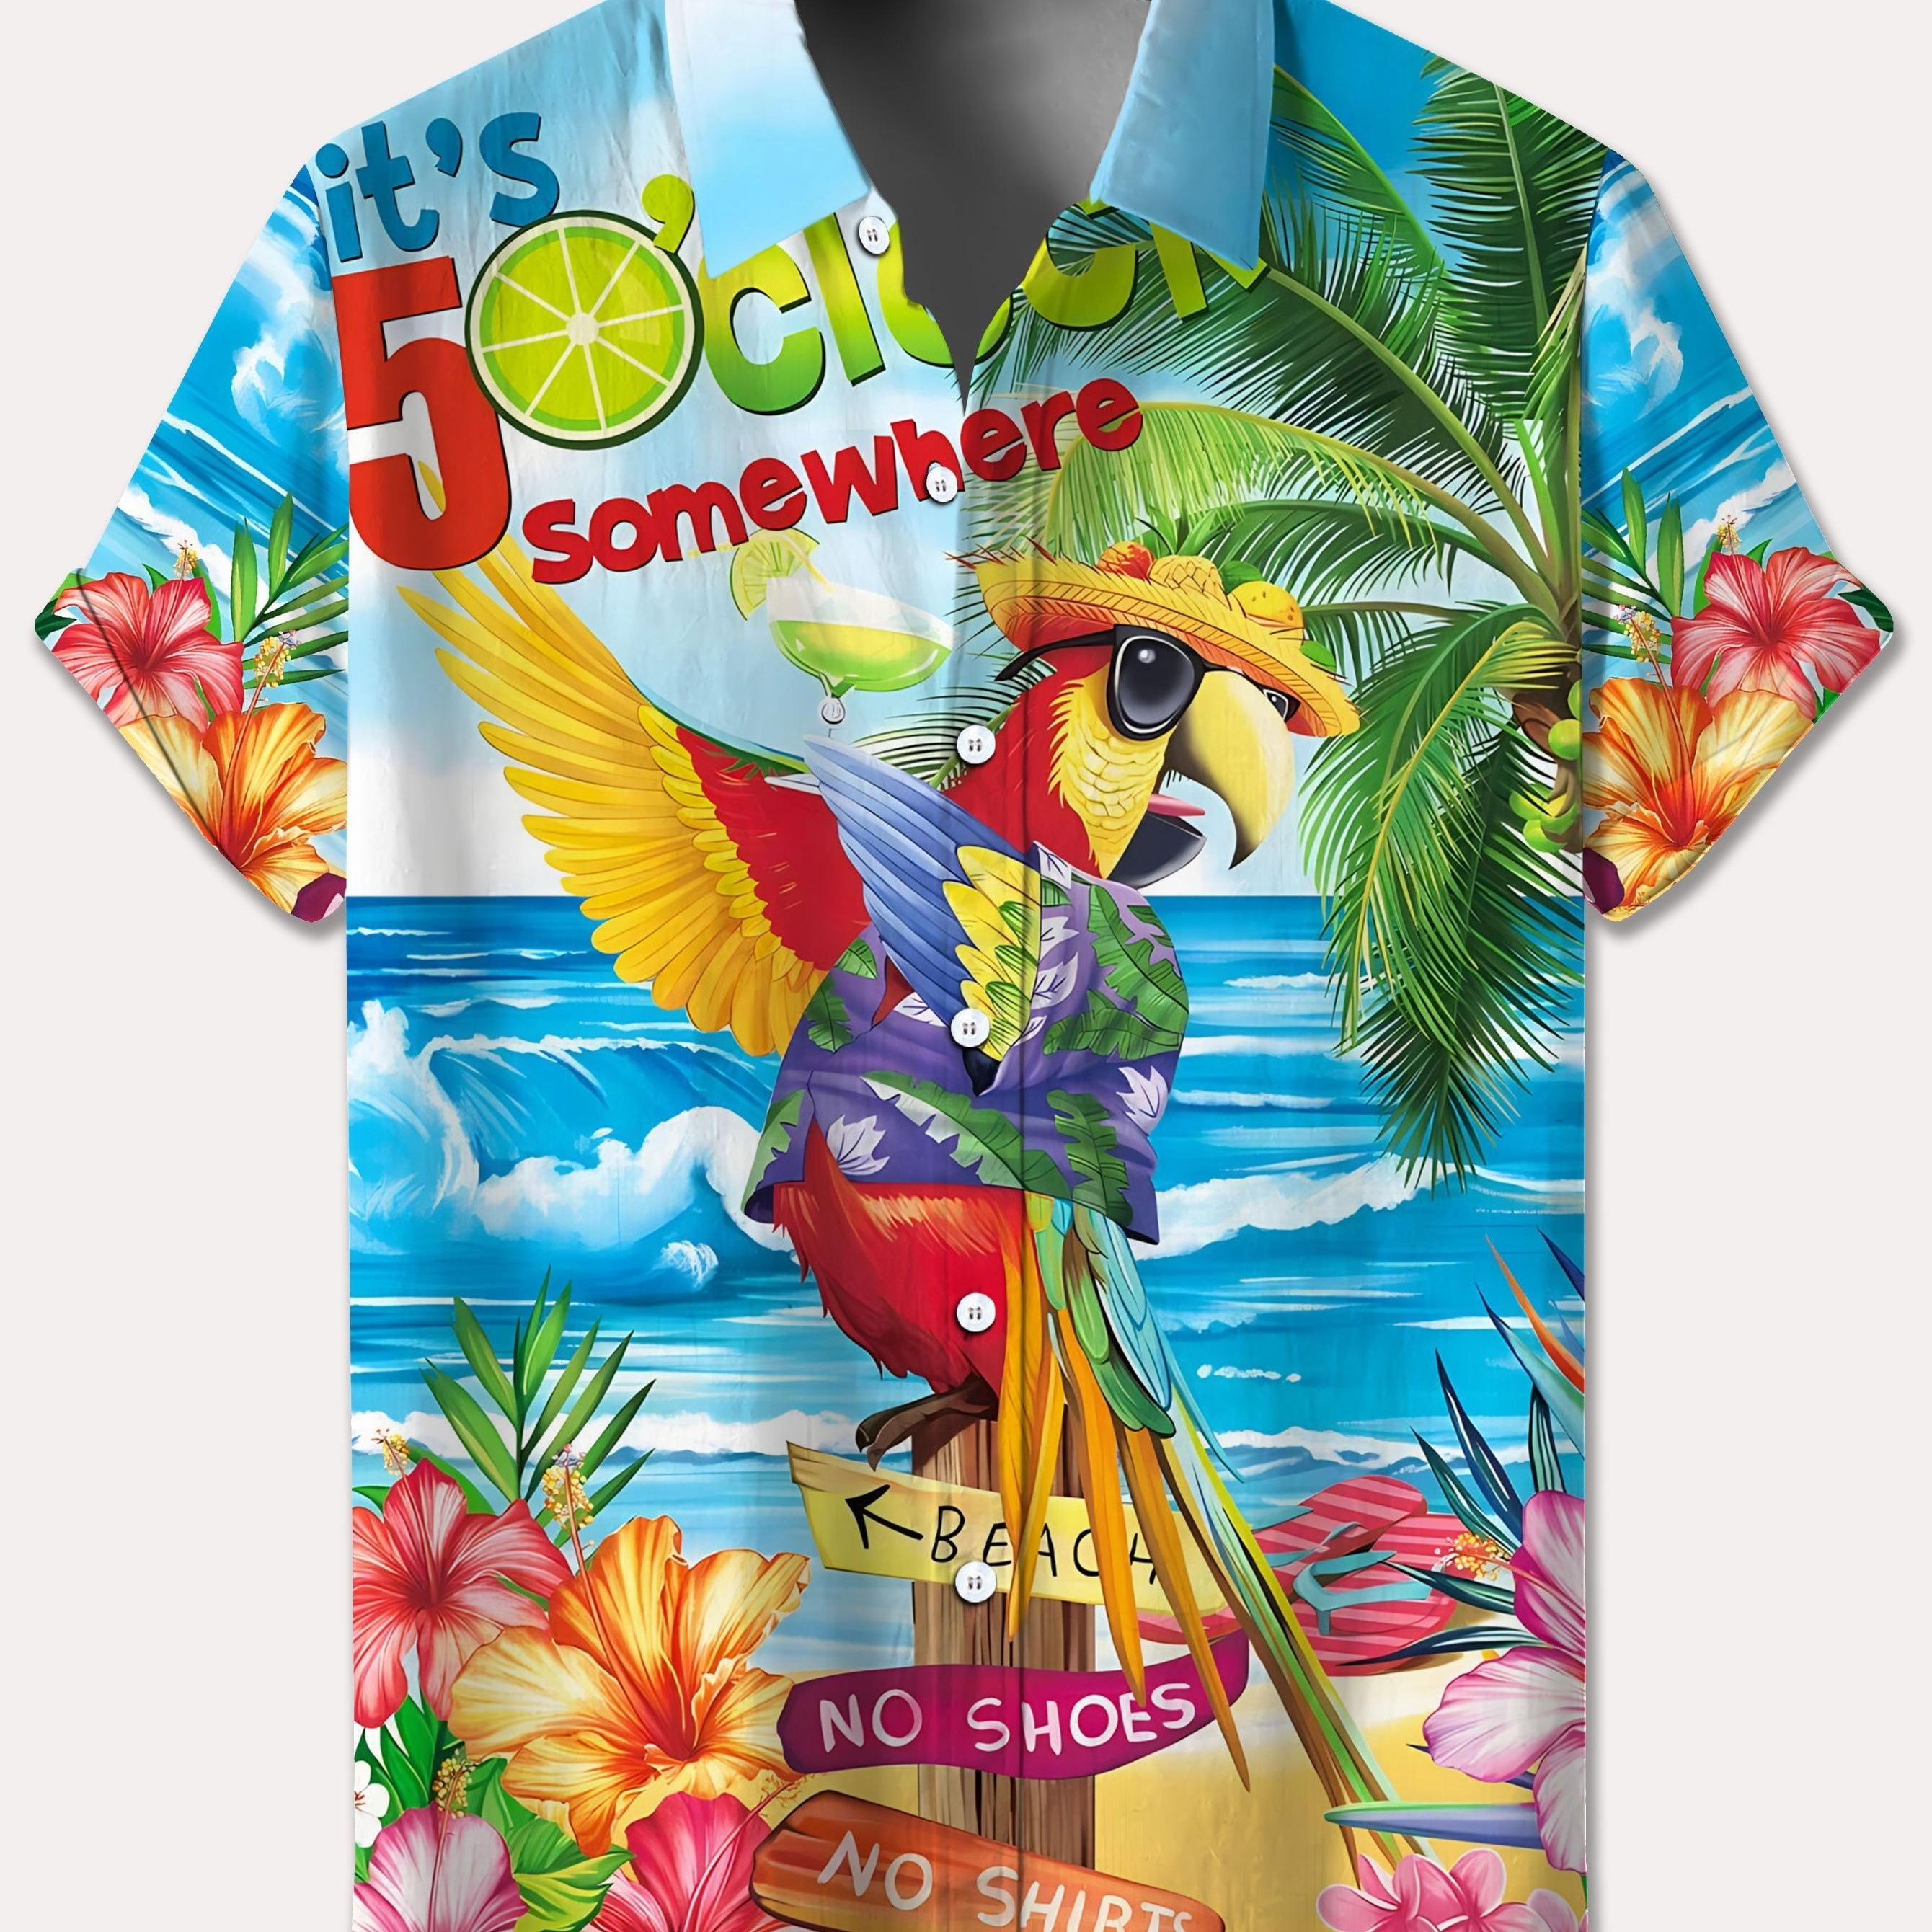 

Plus Size Men's Parrot Graphic Print Shirt For Summer, Vintage Style Short Sleeve Shirt, Hawaiian Style Holiday Tops